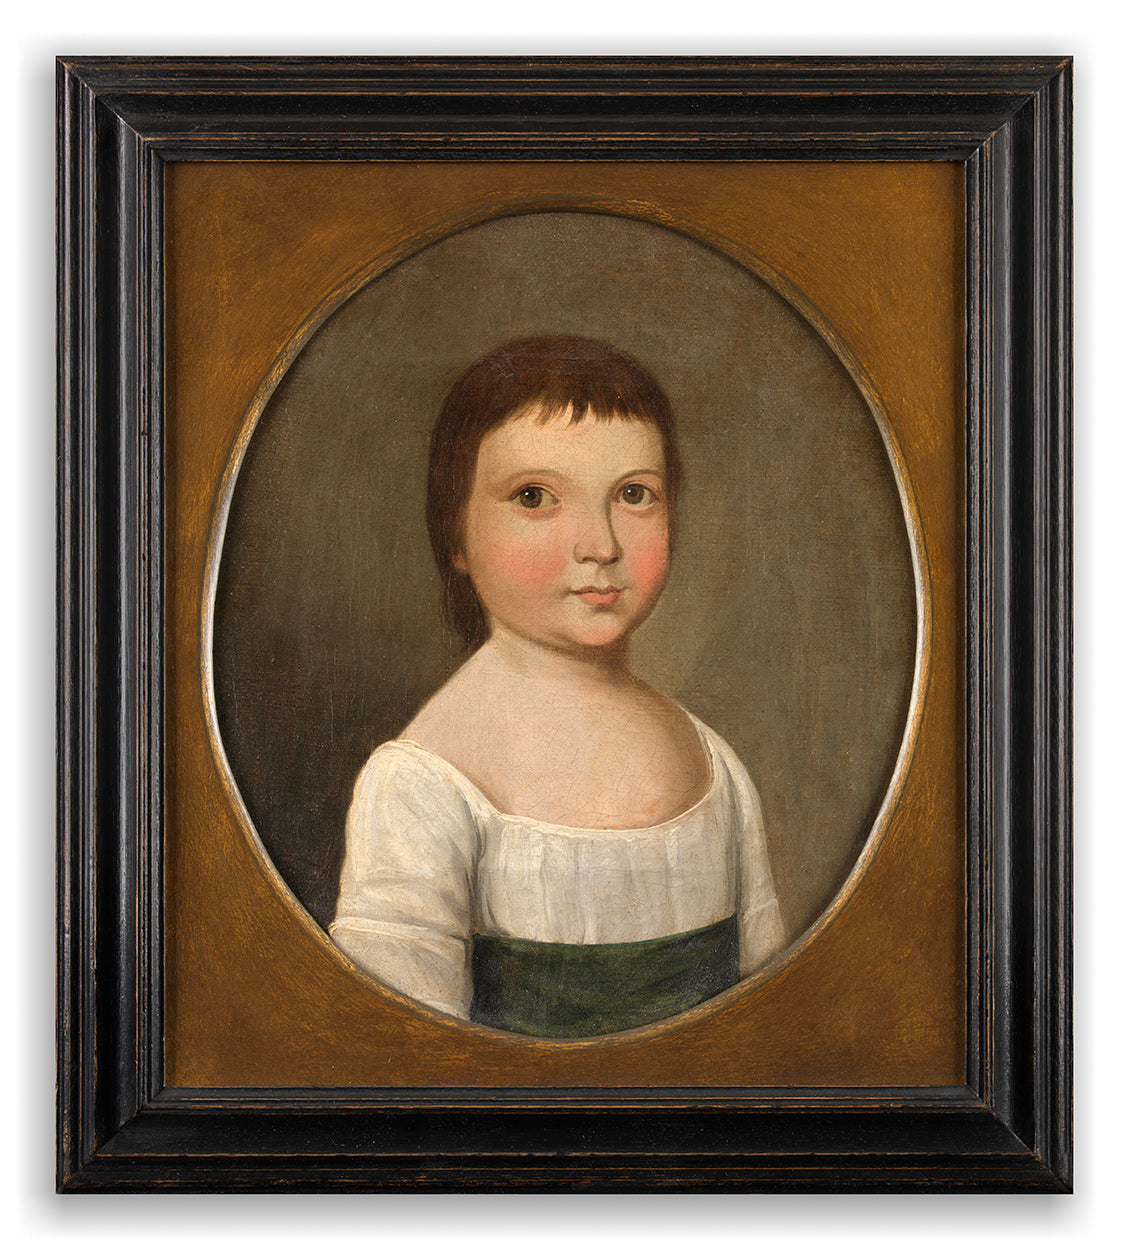 A Compelling Naive Oval Portrait of a Child with Brown Eyes